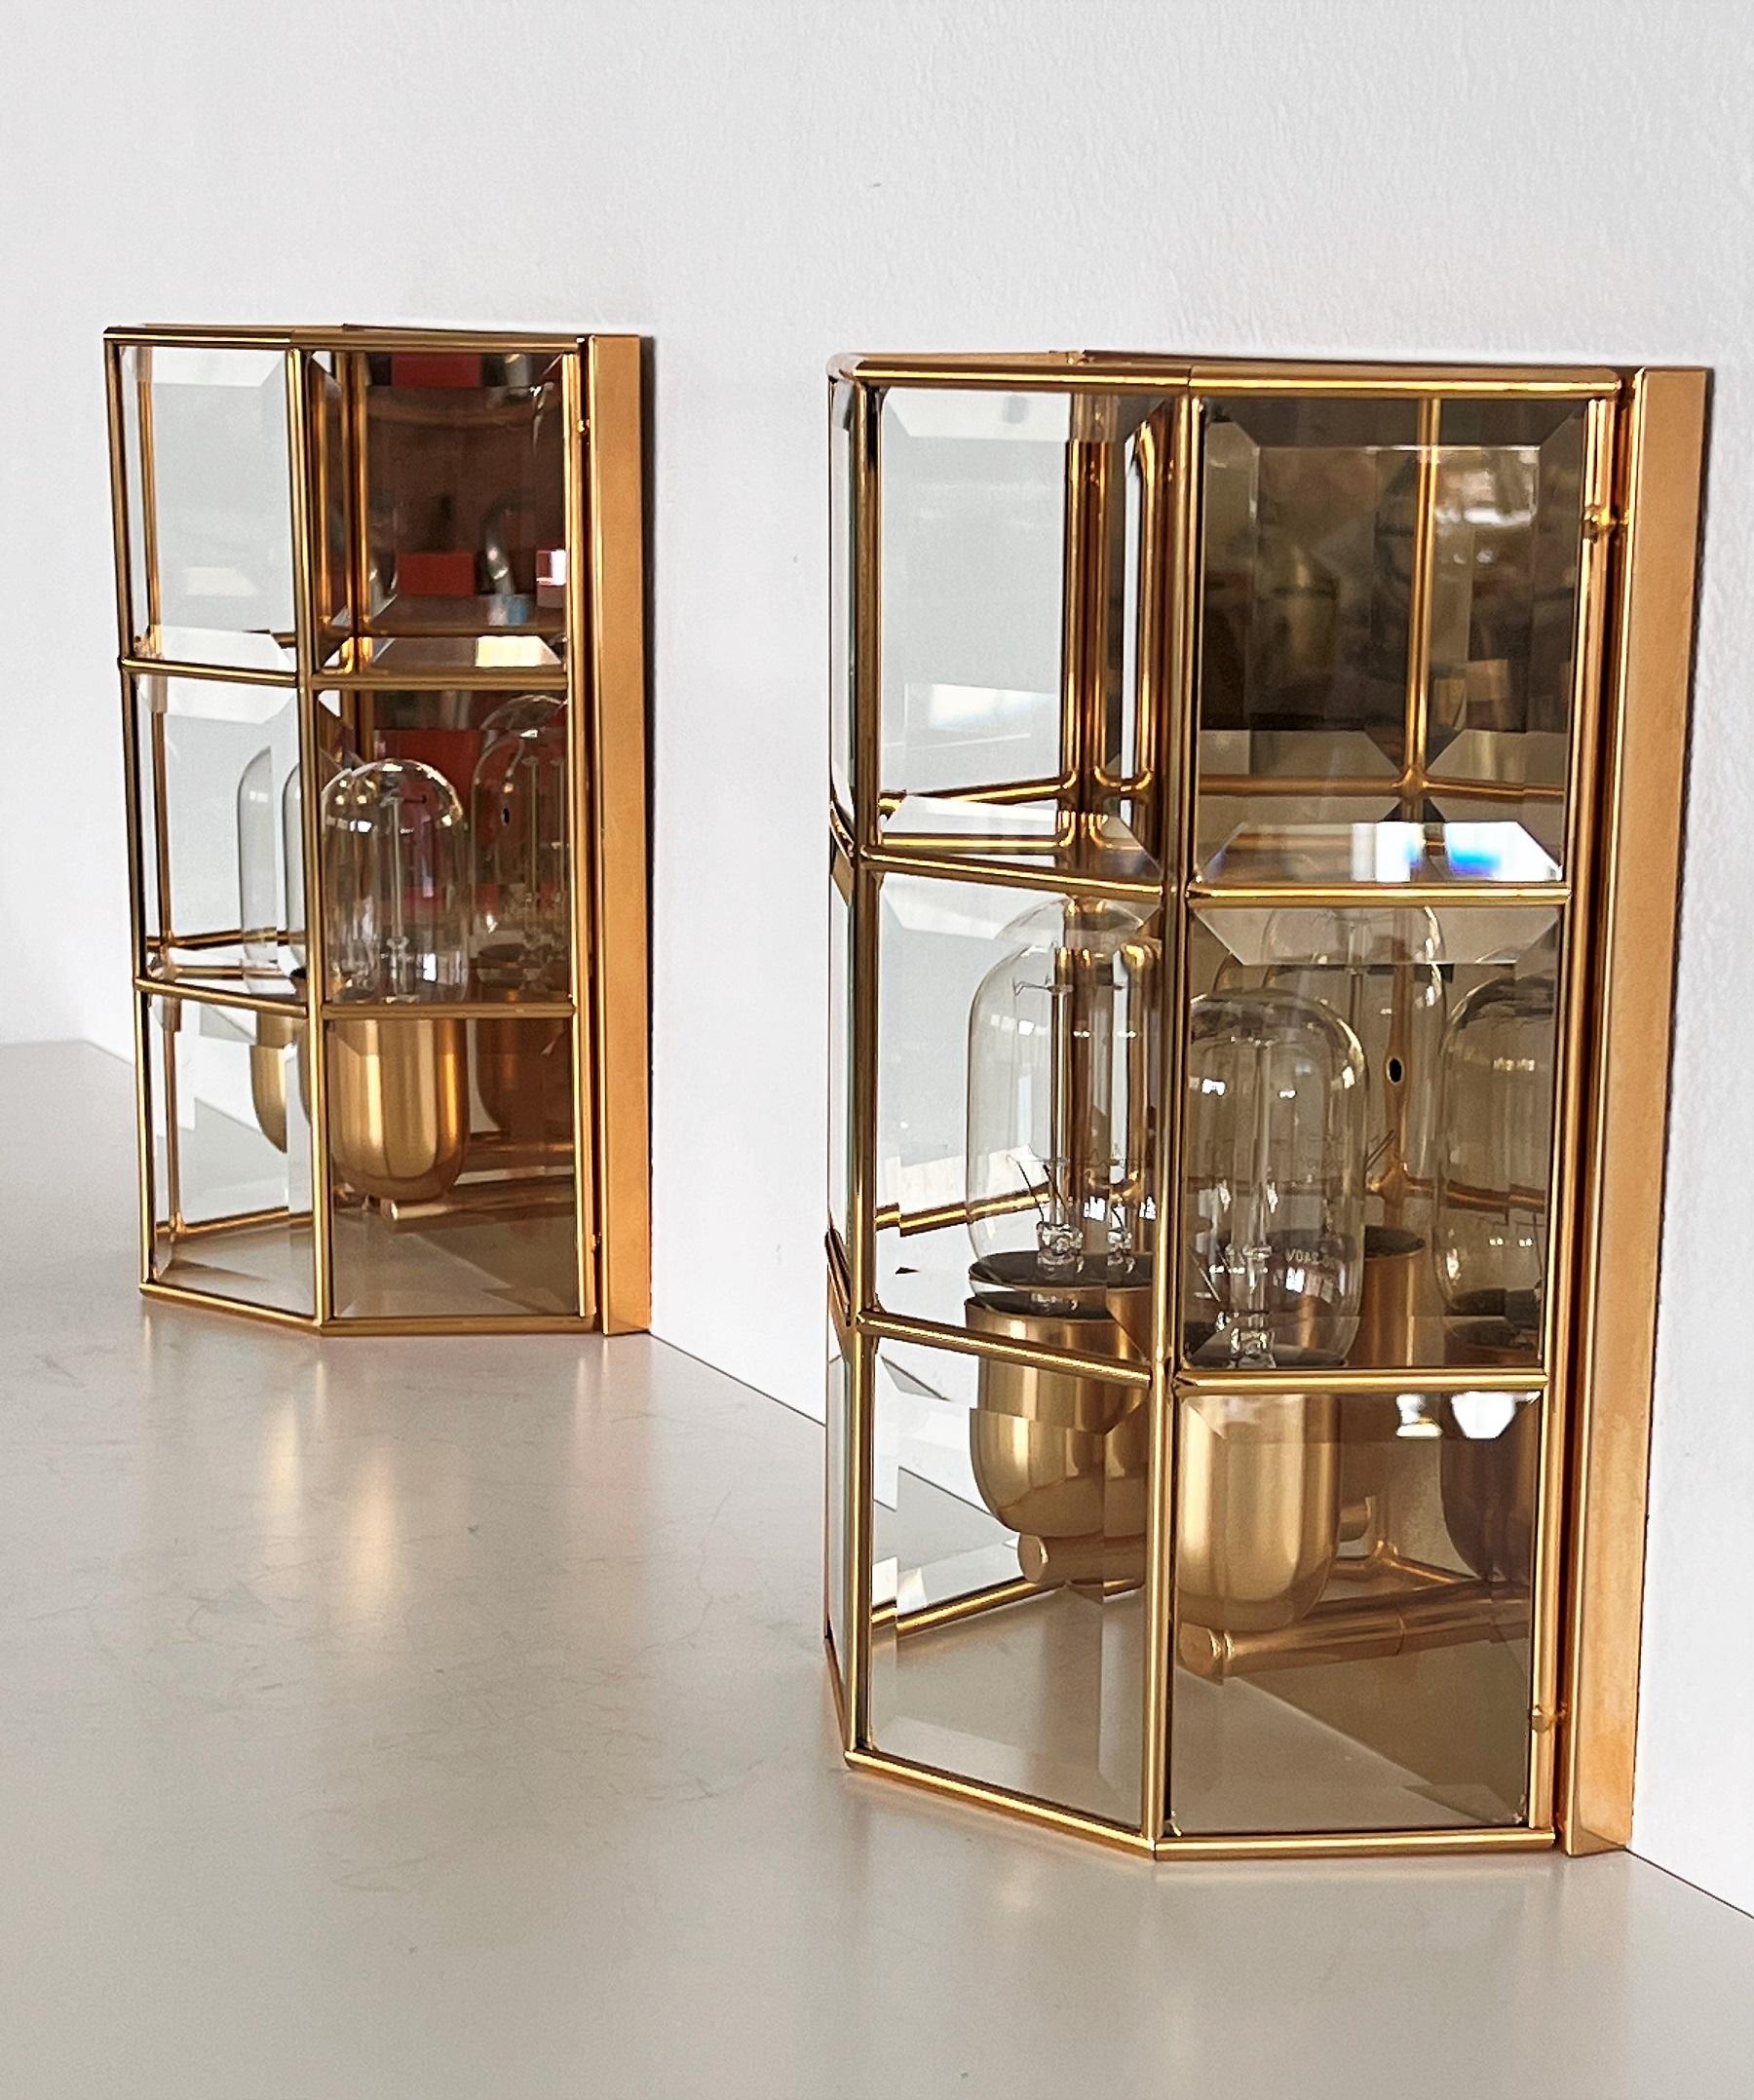 Metal Italian Midcentury Golden Wall Sconces in Cut Glass with Brass Finish, 1970s For Sale